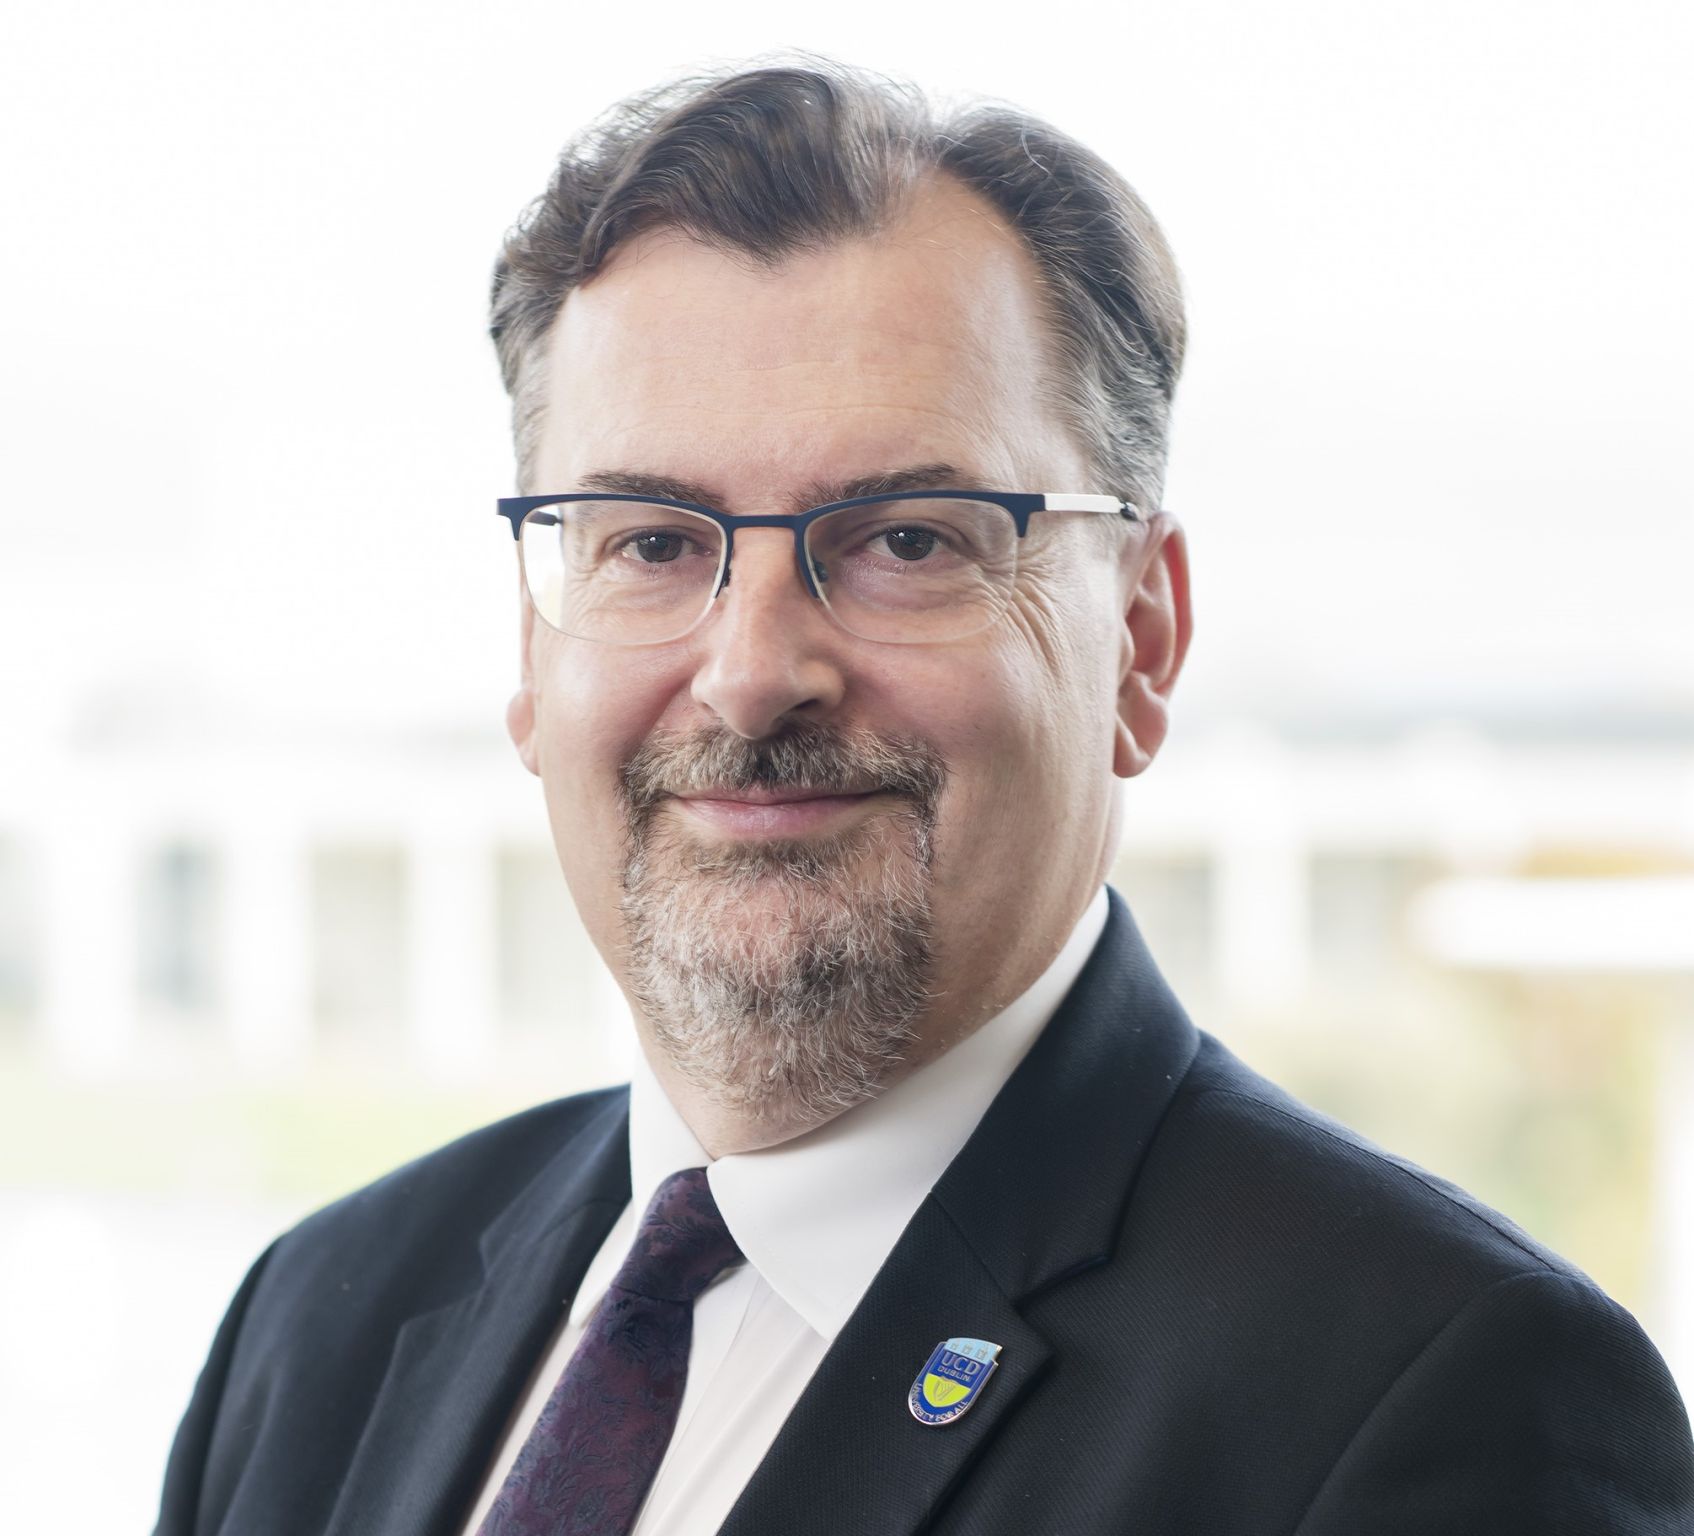 Professor Colin Scott appointed to UCD leadership role